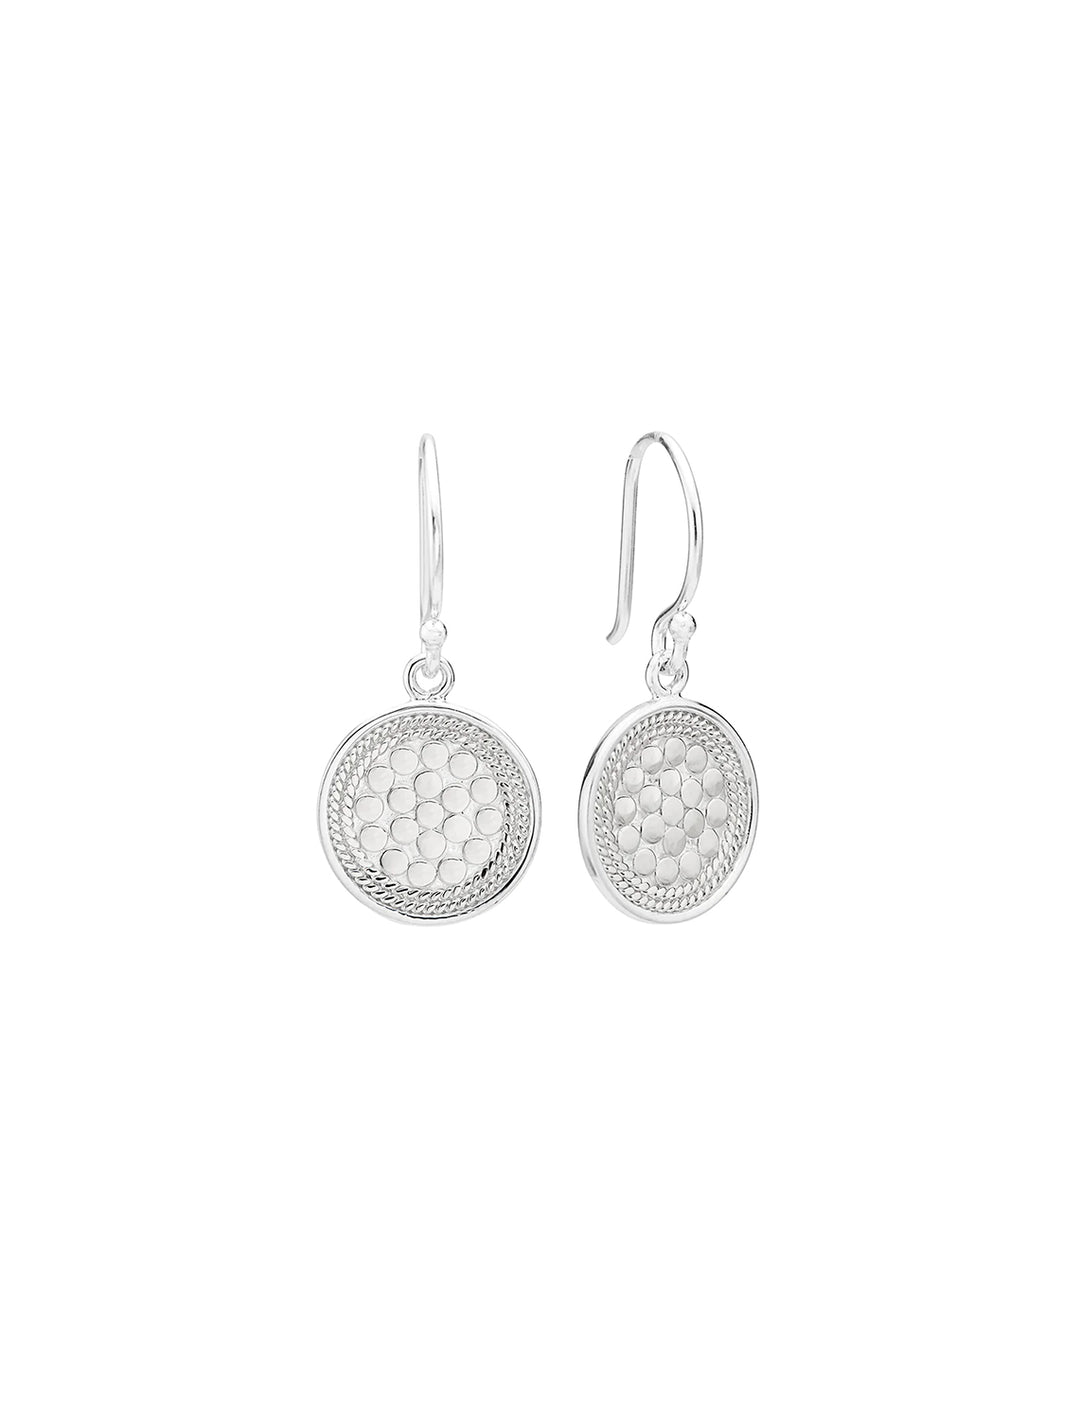 Anna Beck's classic circle drop earrings in silver.